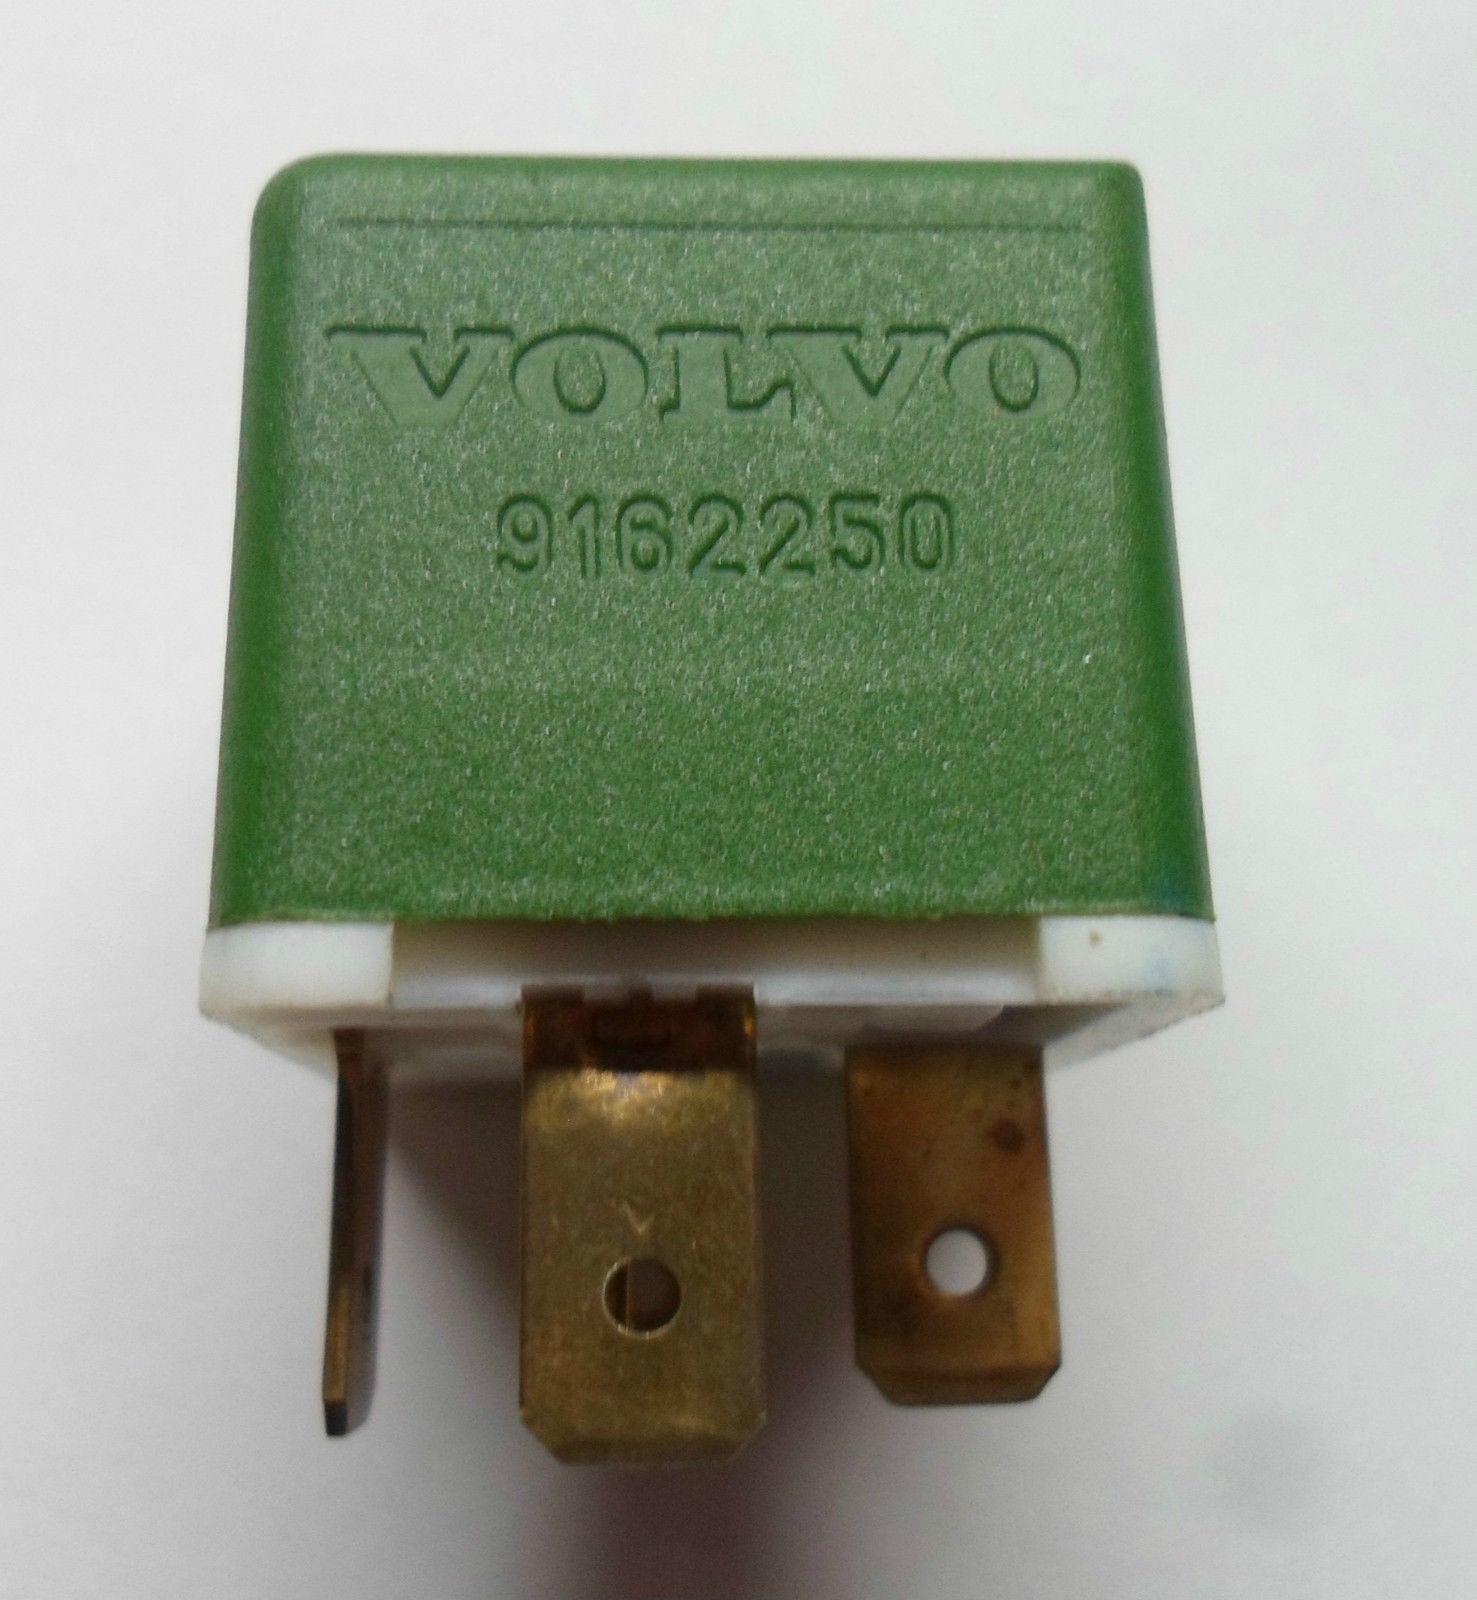 VOLVO  RELAY 9162250 TESTED  OEM  FREE SHIPPING! 6 MONTH WARRANTY! V2